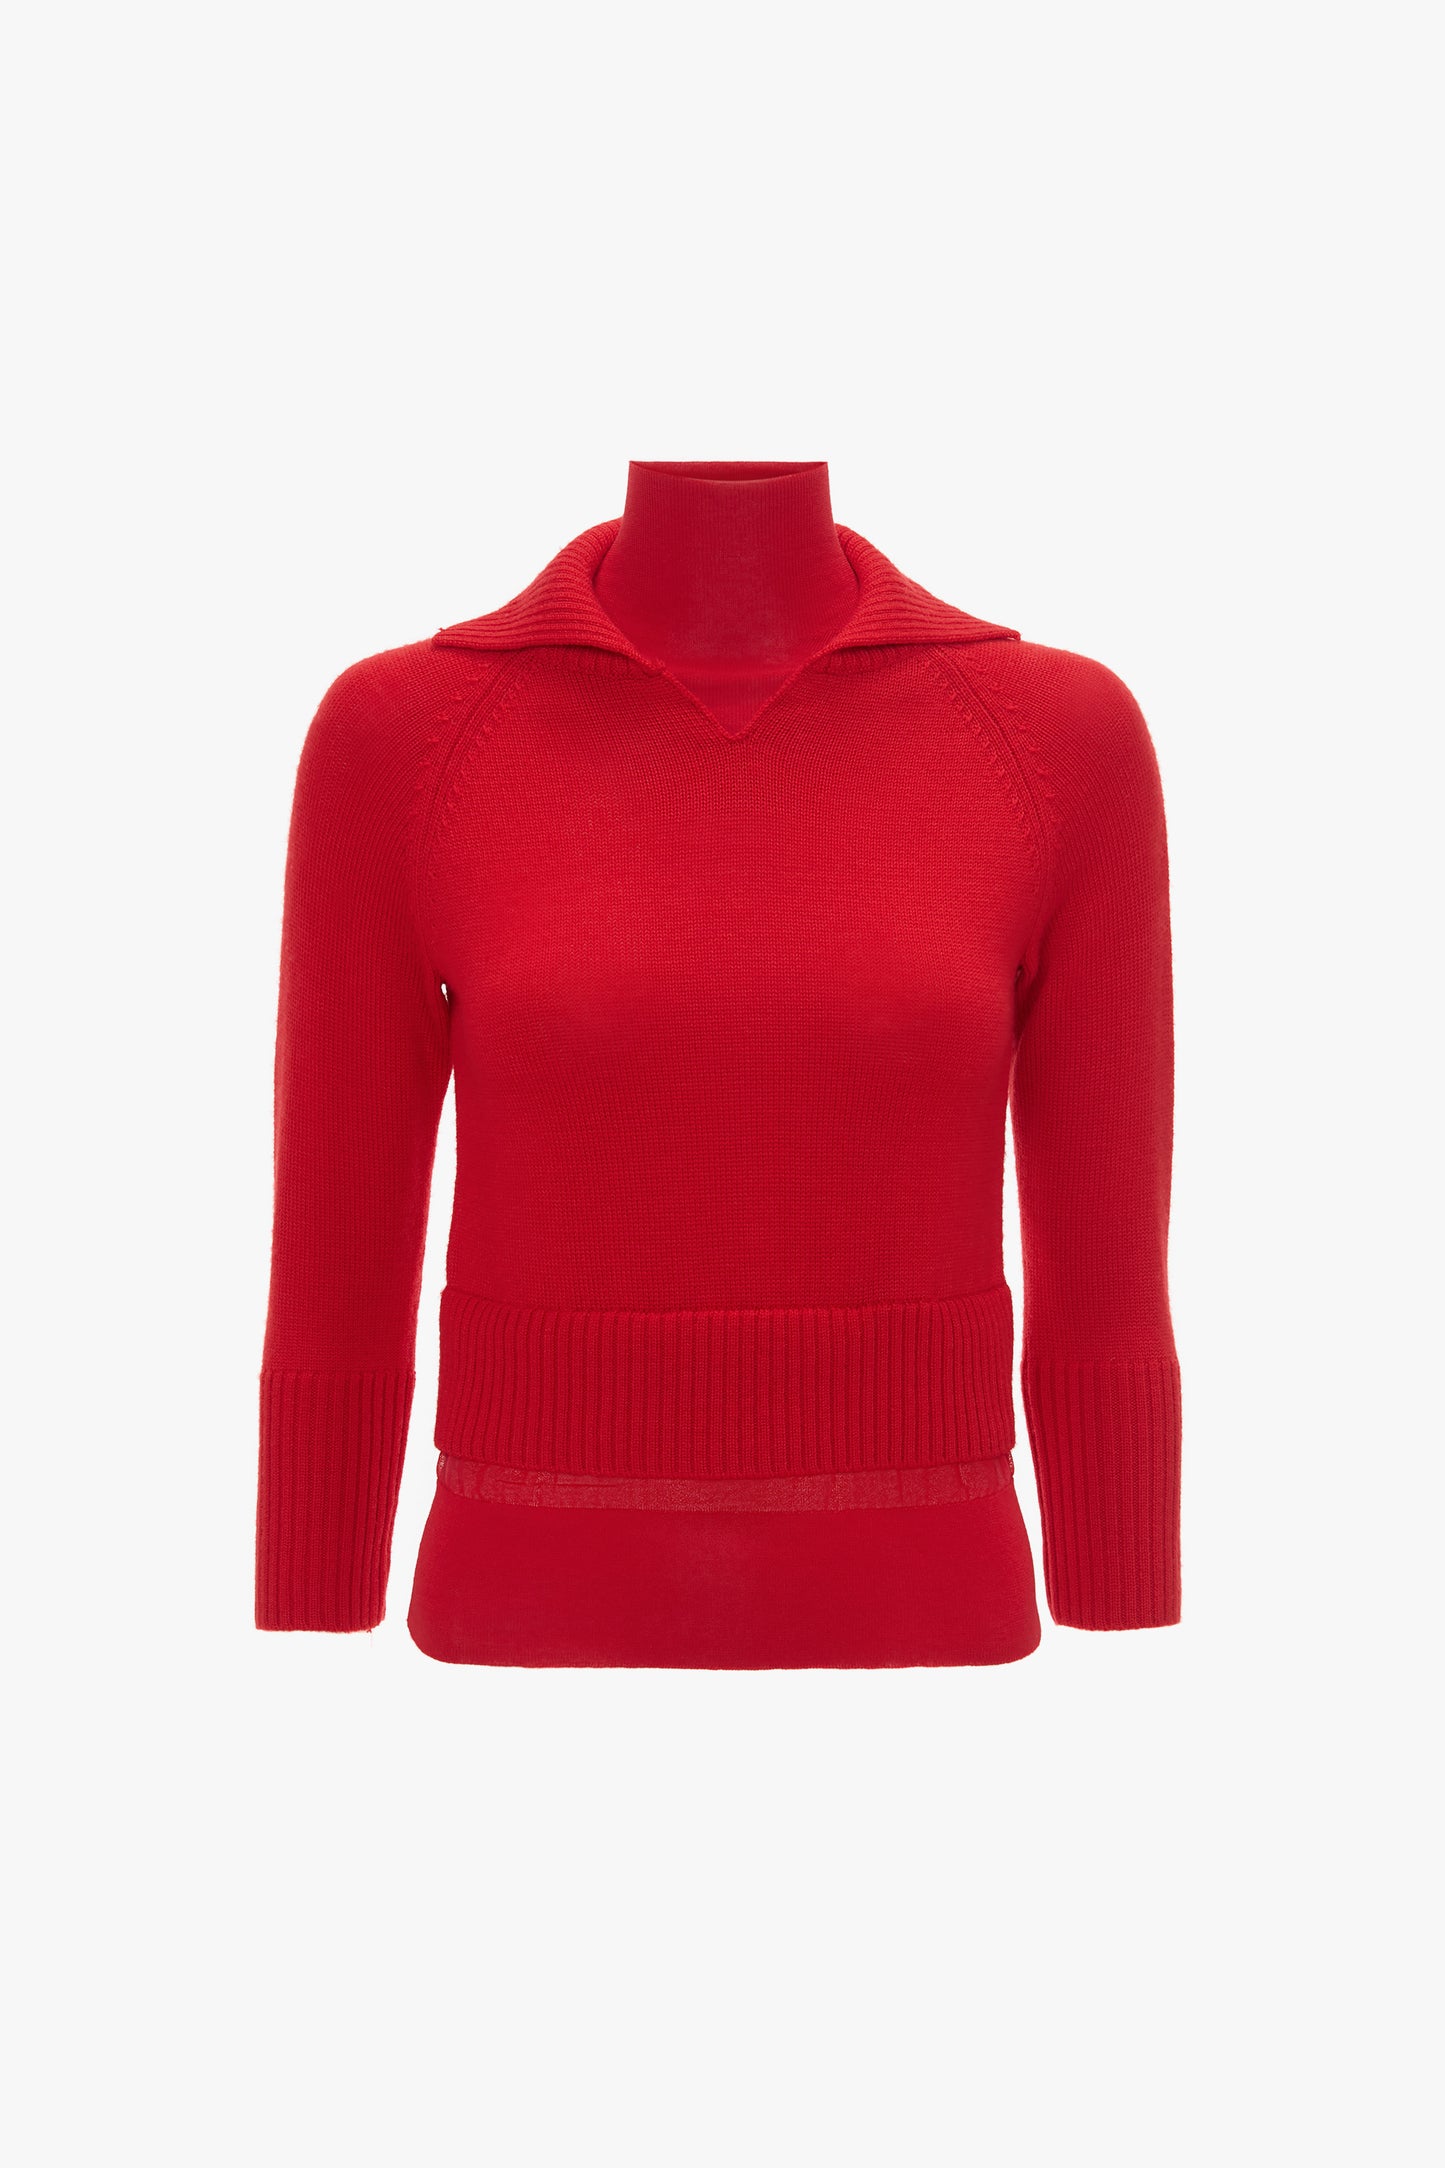 Victoria Beckham's Double Layer Top In Deep Red with a V-neck collar, ribbed cuffs, and hem, crafted from luxurious merino wool.